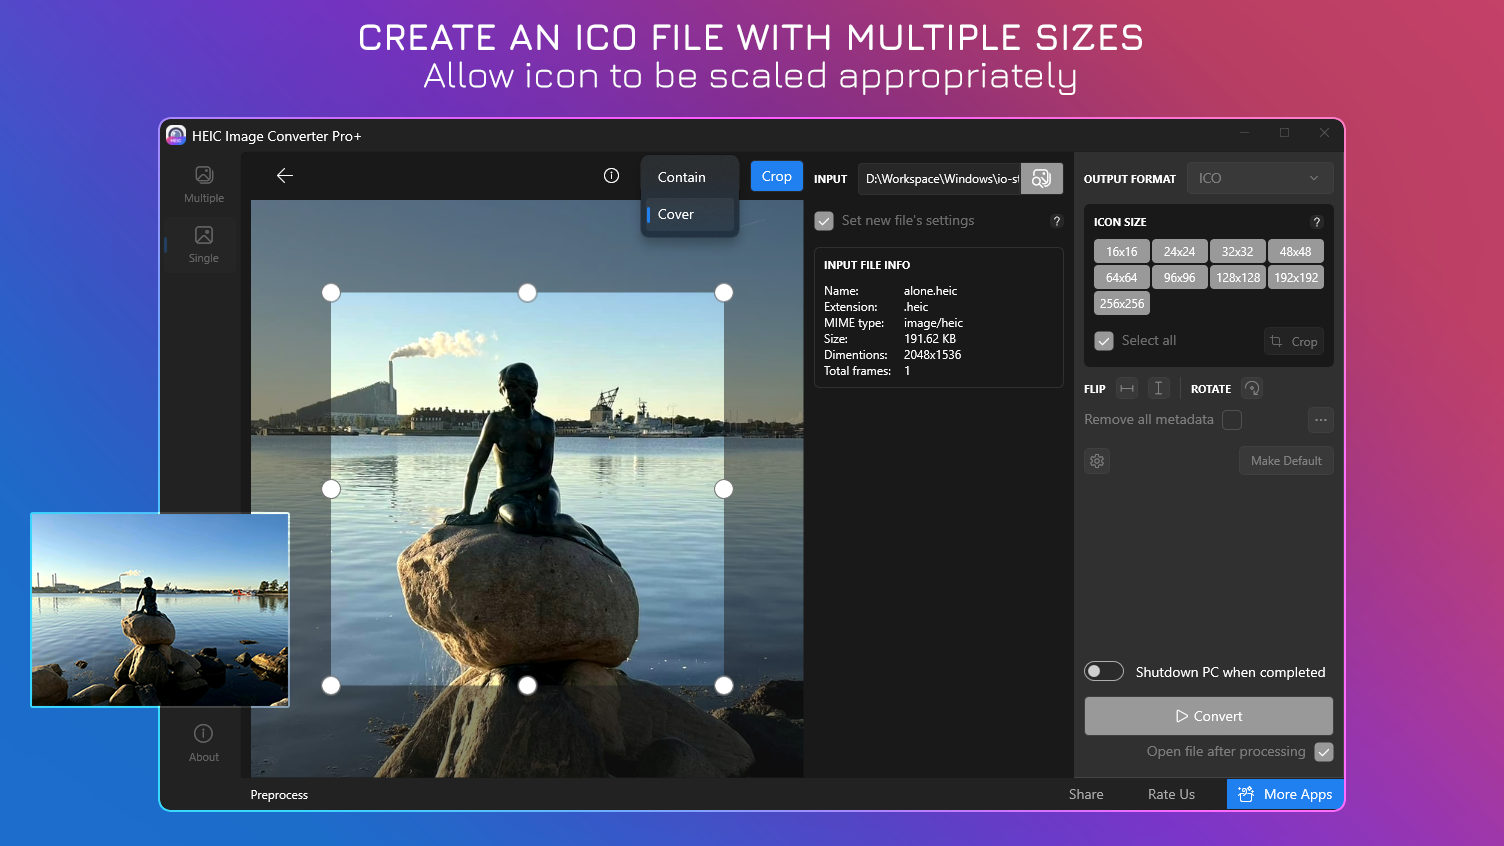 Create An ICO File With Multiple Sizes - Allow icon to be scaled appropriately